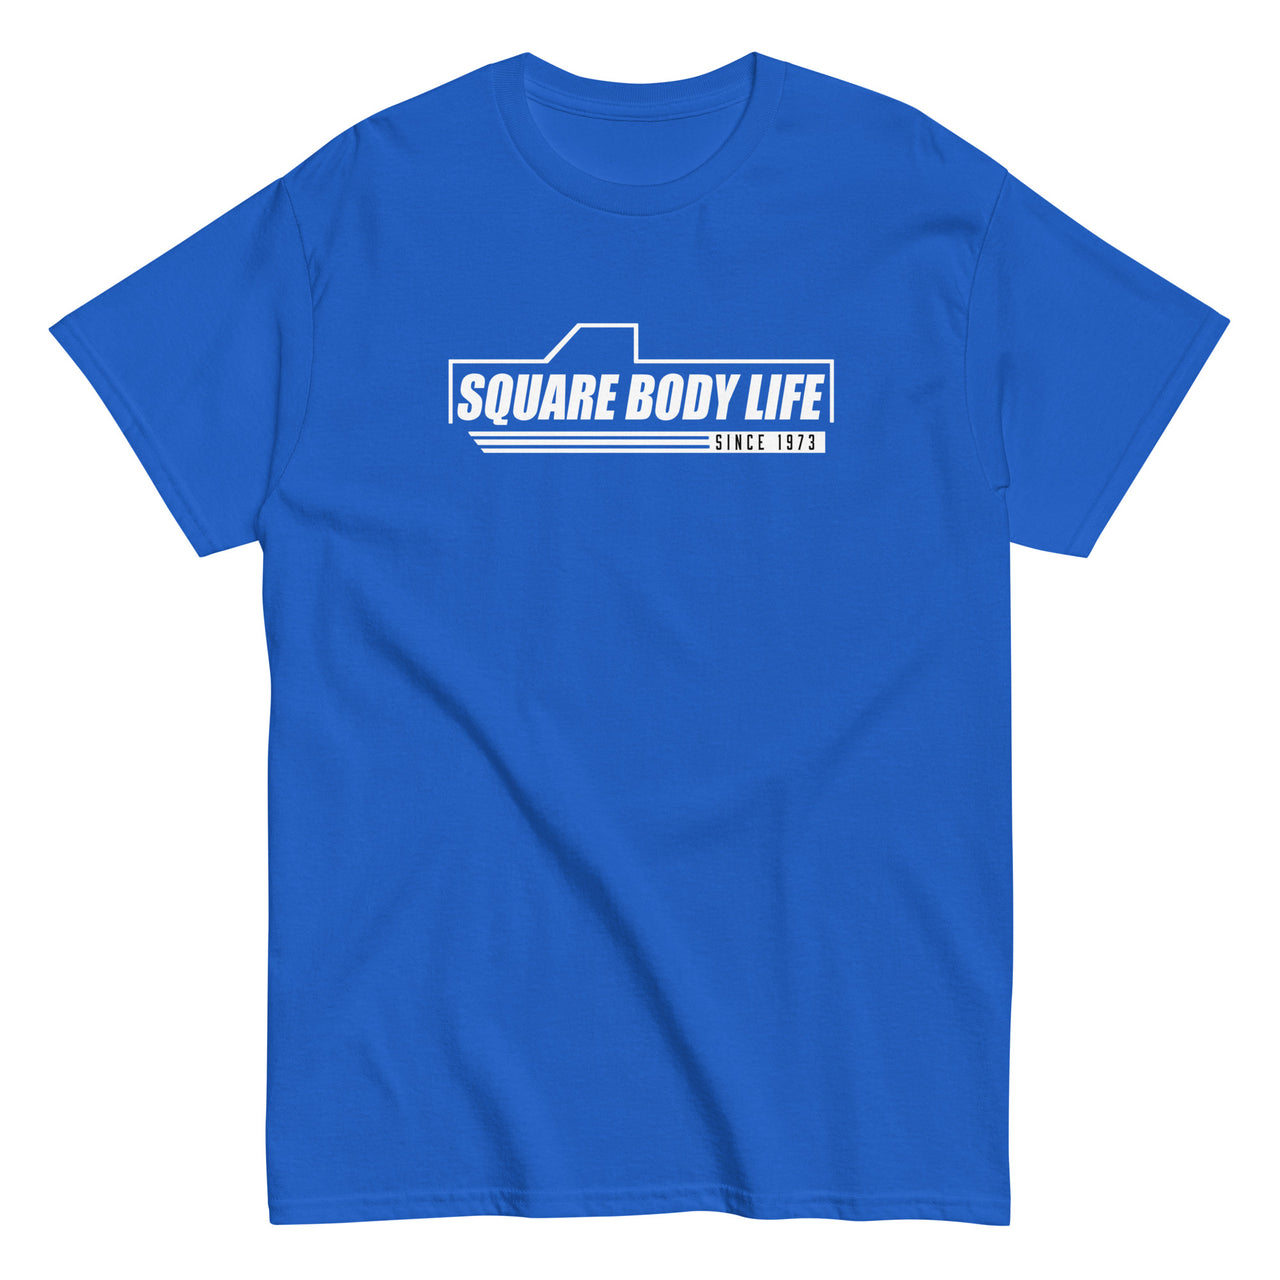 Square Body Life Truck T-Shirt in royal